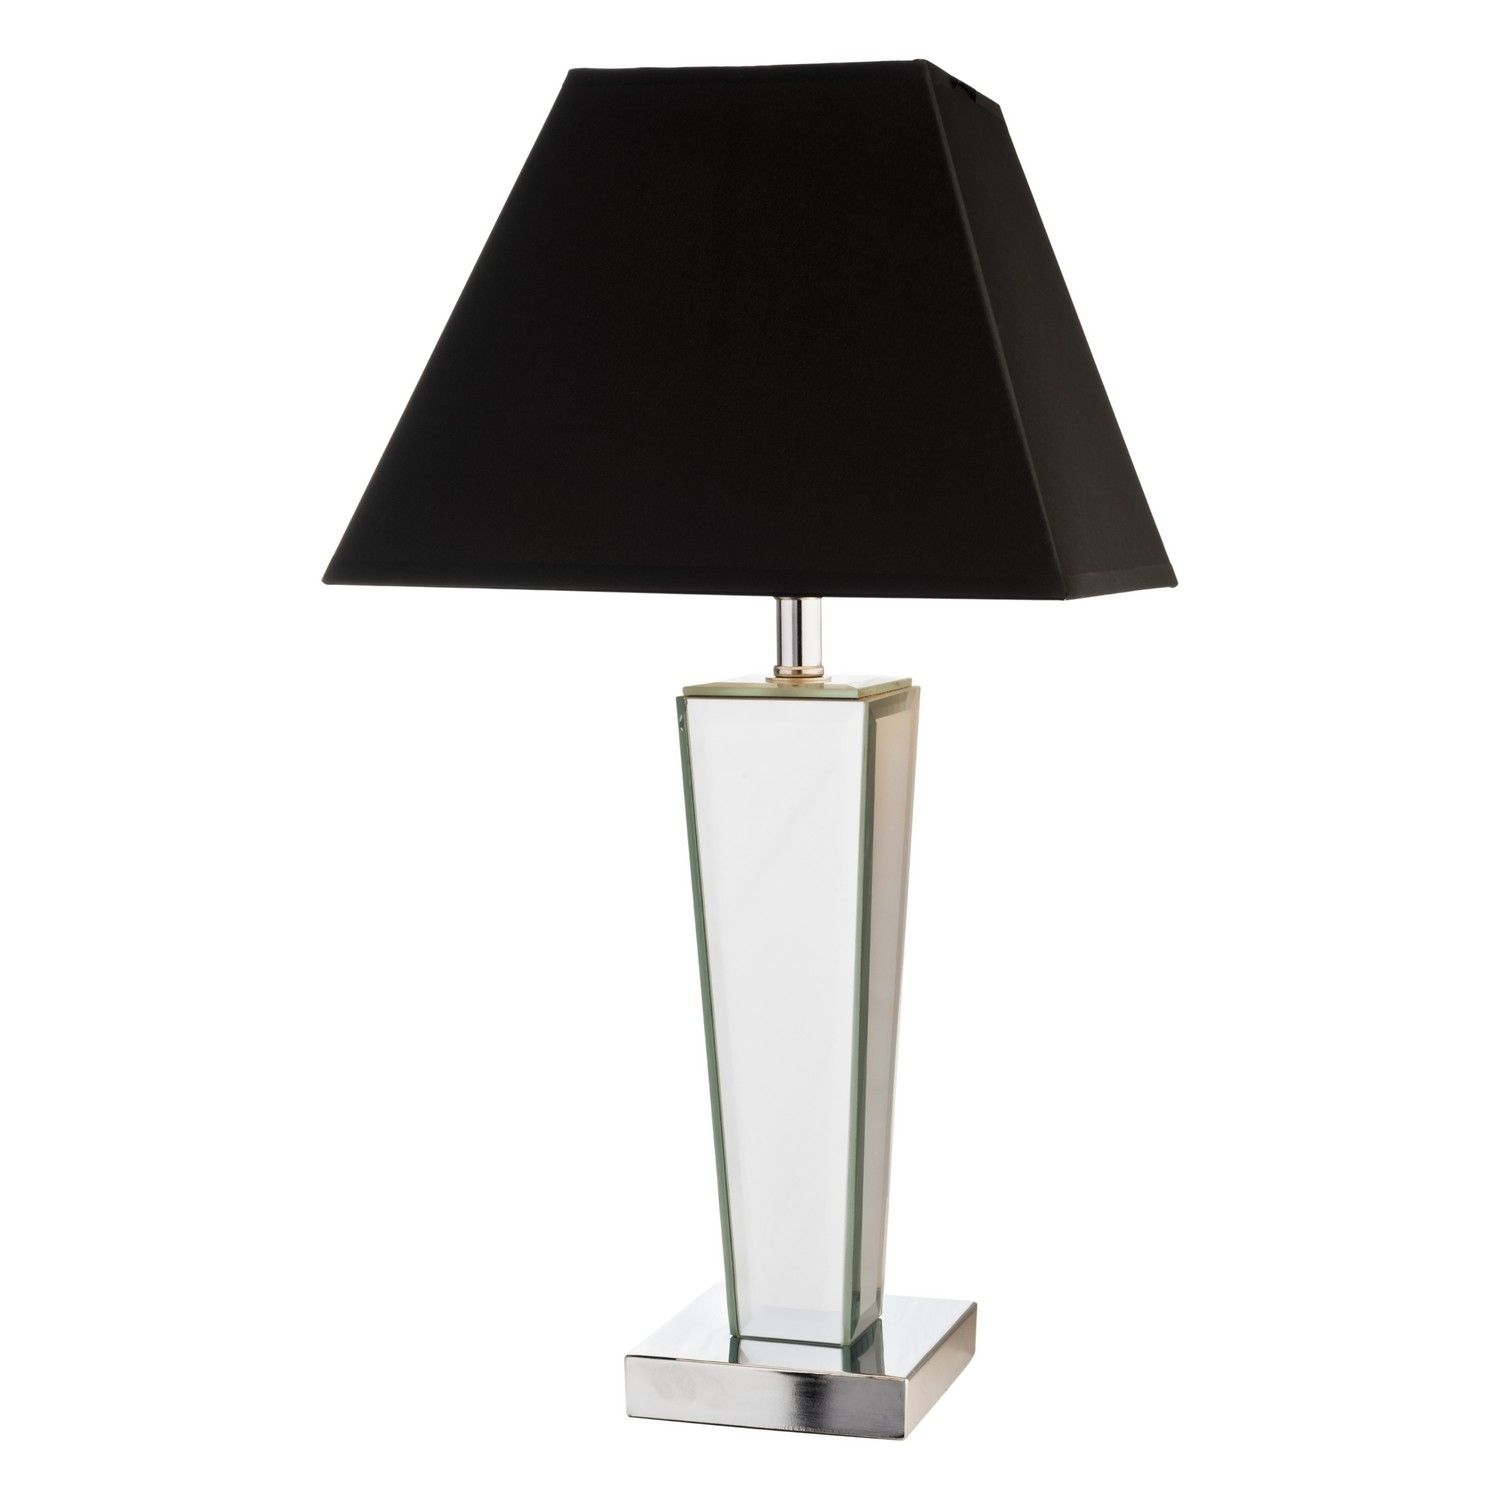 Mirror Table Lamp Range Living Room Black Table Lamps intended for measurements 1500 X 1500